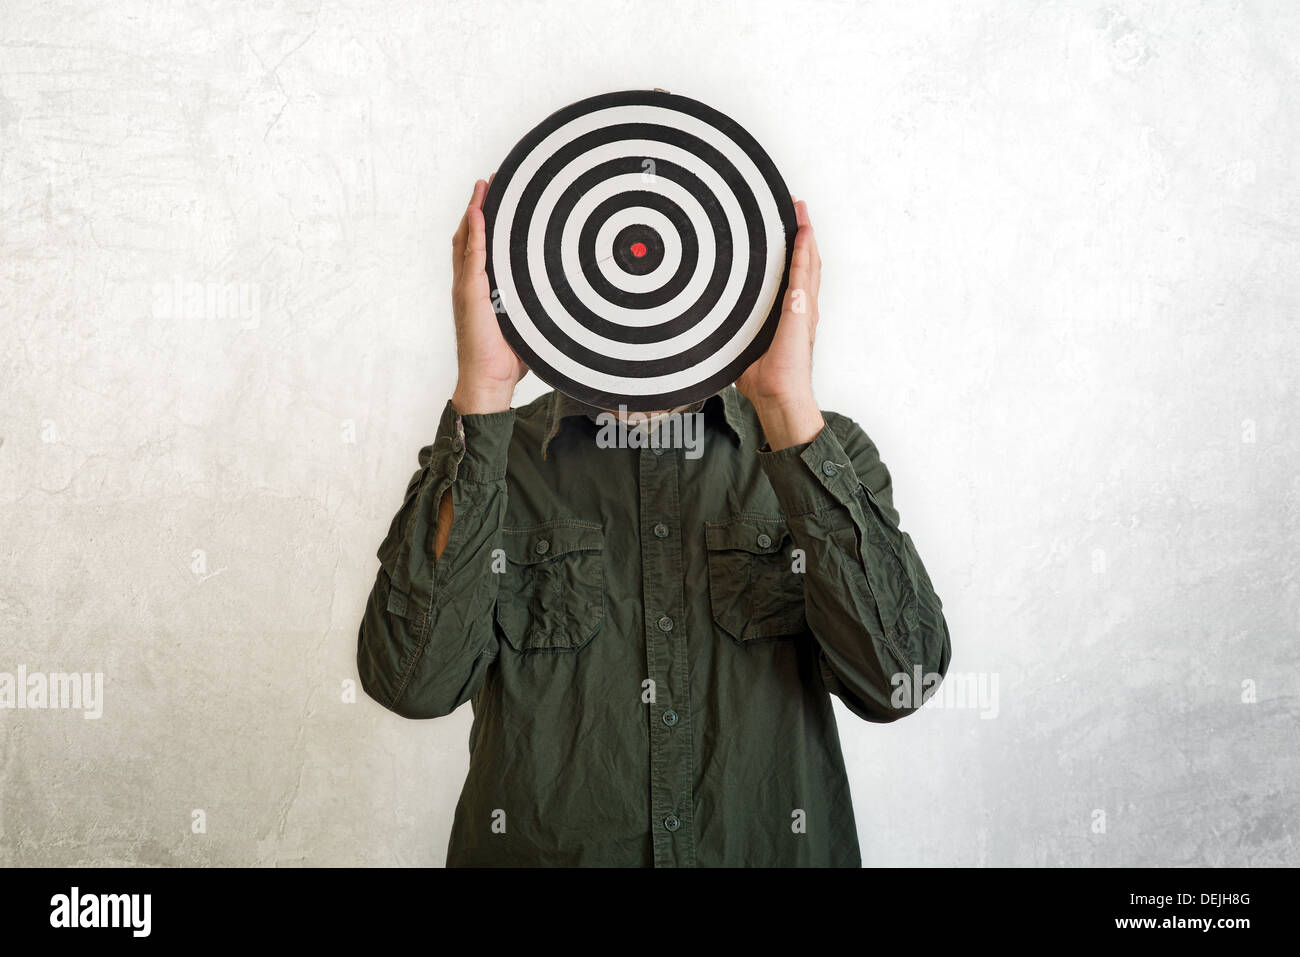 Man holding dartboard in place of head. Stock Photo